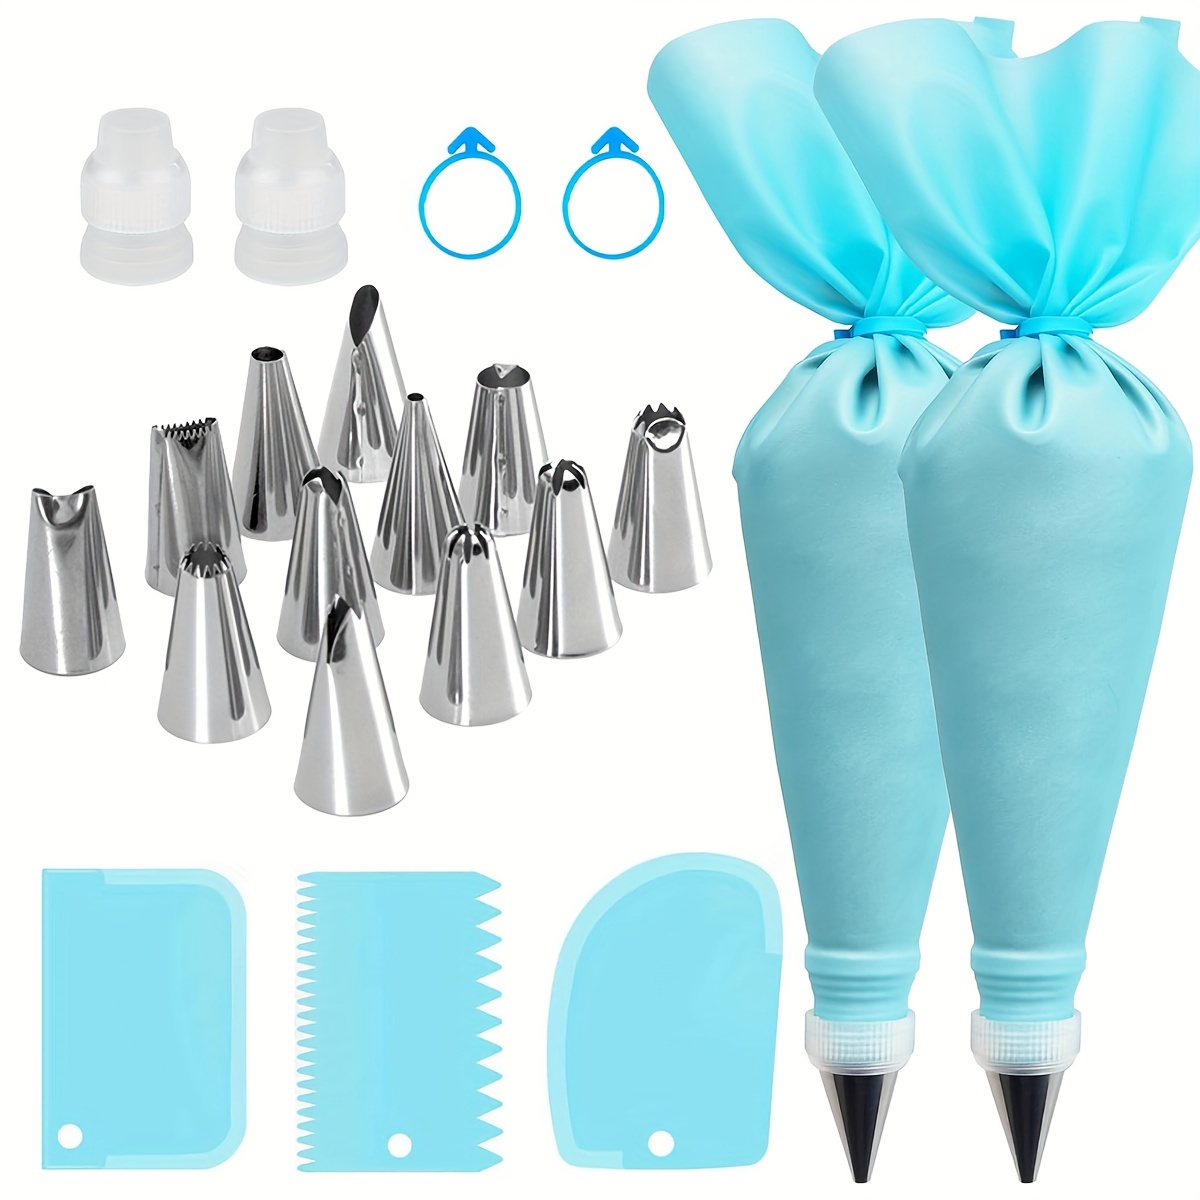 

21-piece Cake Decorating Set - Stainless Steel Icing Piping Nozzles, Reusable Pastry Bags, Converters & Scrapers - Versatile Tools For Christmas, Halloween, Thanksgiving Baking & Cake Design